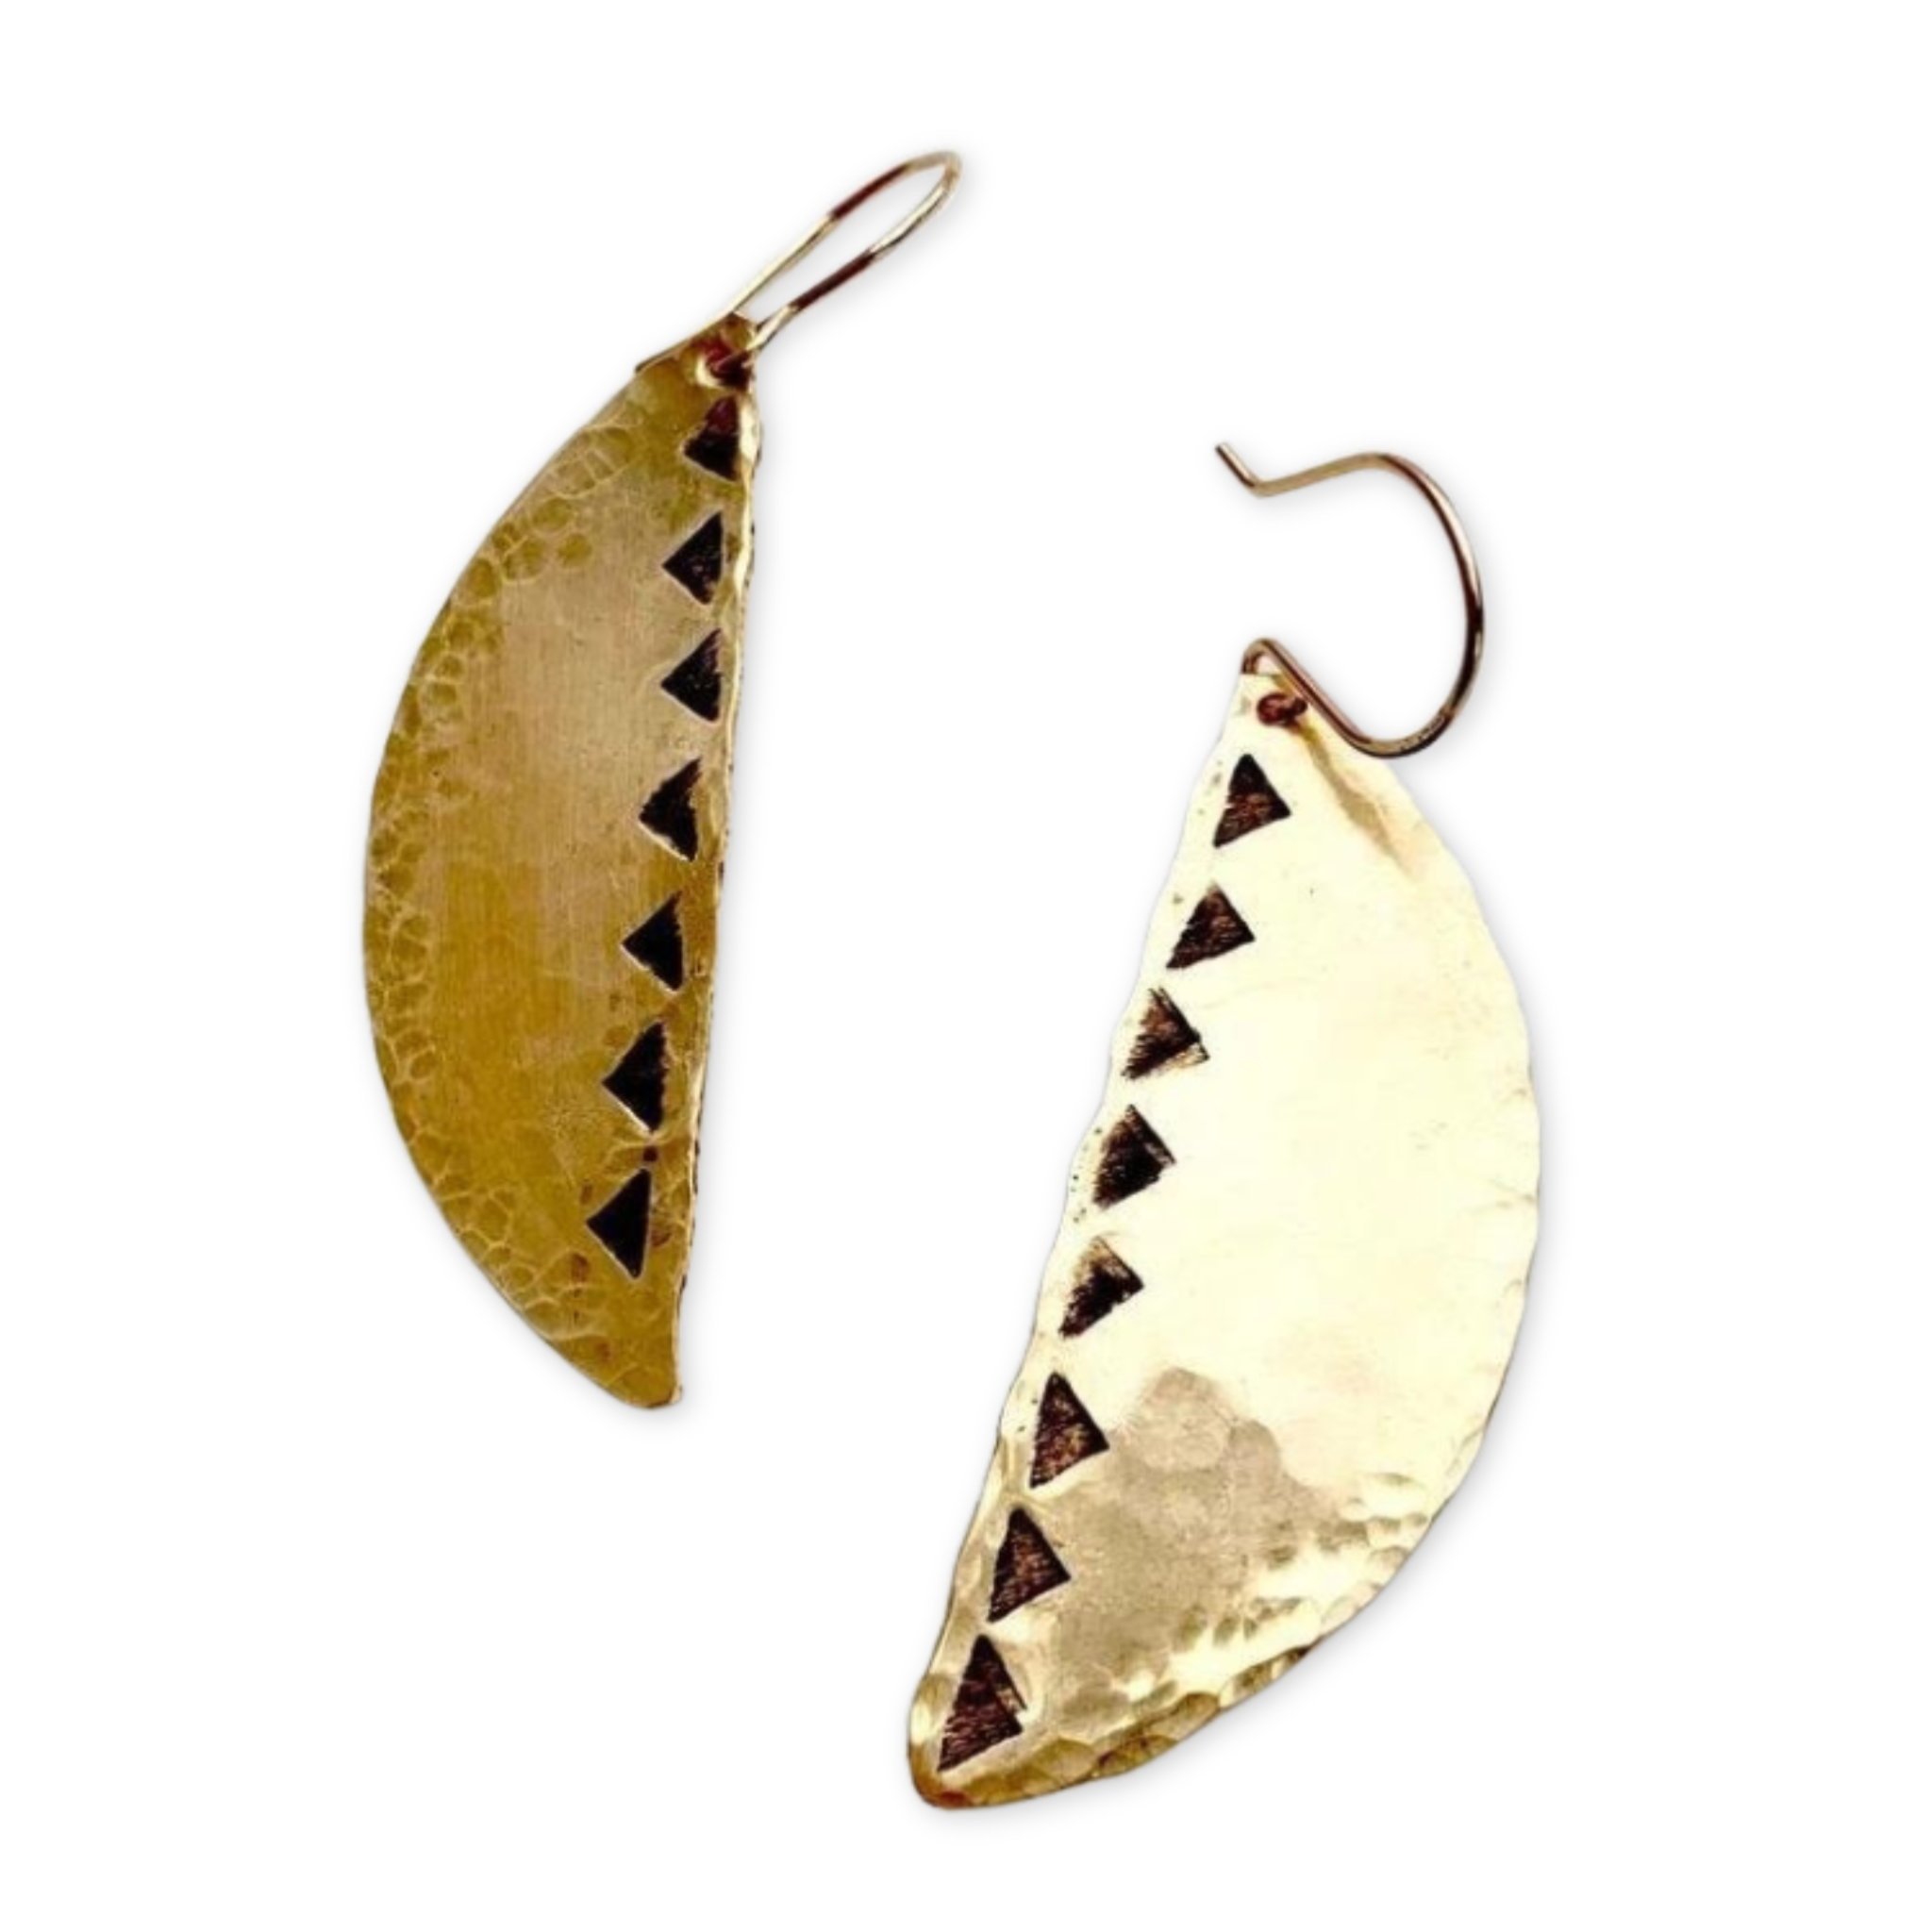 earrings with large hanging half circle pendants stamped with triangles